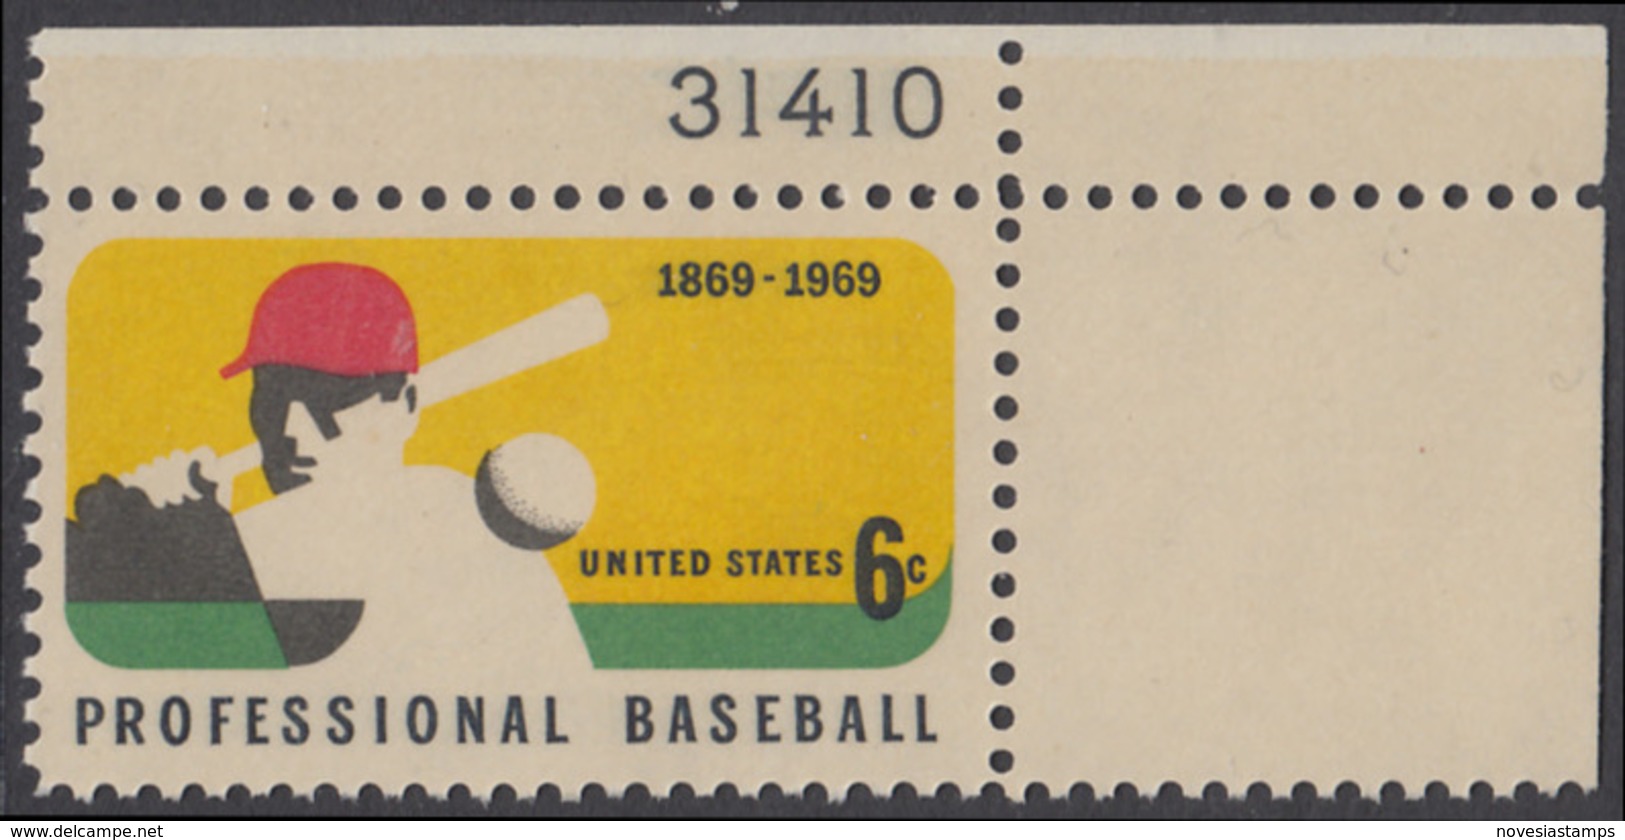 !a! USA Sc# 1381 MNH SINGLE From Upper Right Corner W/ Plate-# 31410 (Gum Damaged) - Professional Baseball; 100th Anniv. - Unused Stamps